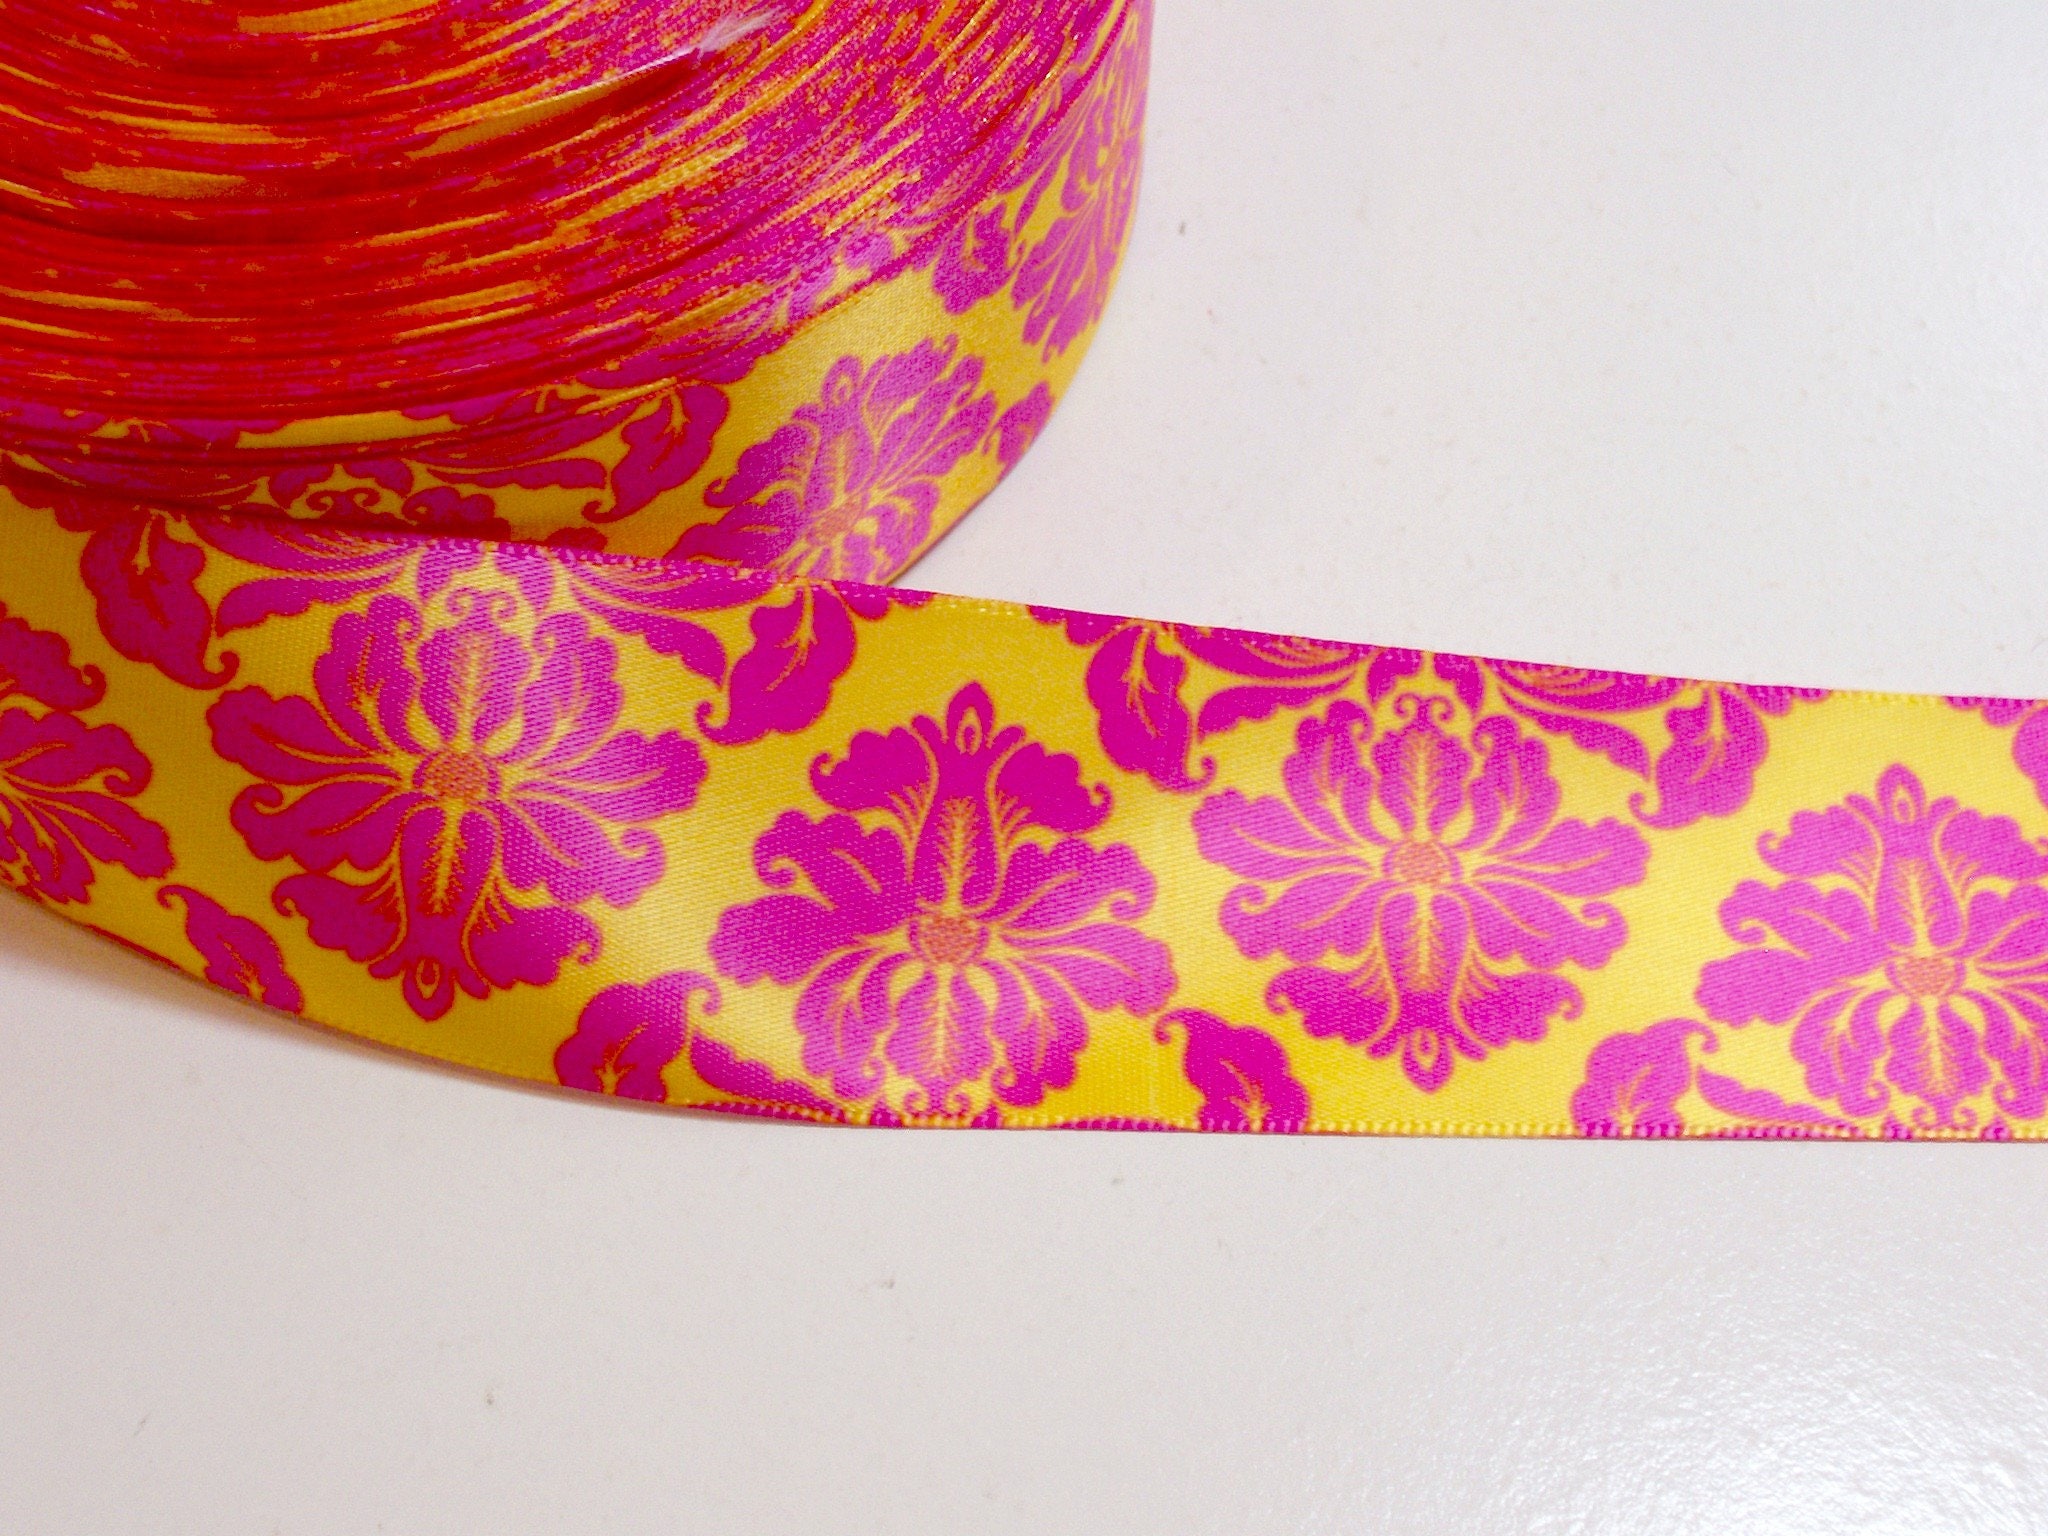 5 YD Fuchsia Pink 1.5 Inch Satin Ribbon, Double Faced, Schiff, Bows, Sale